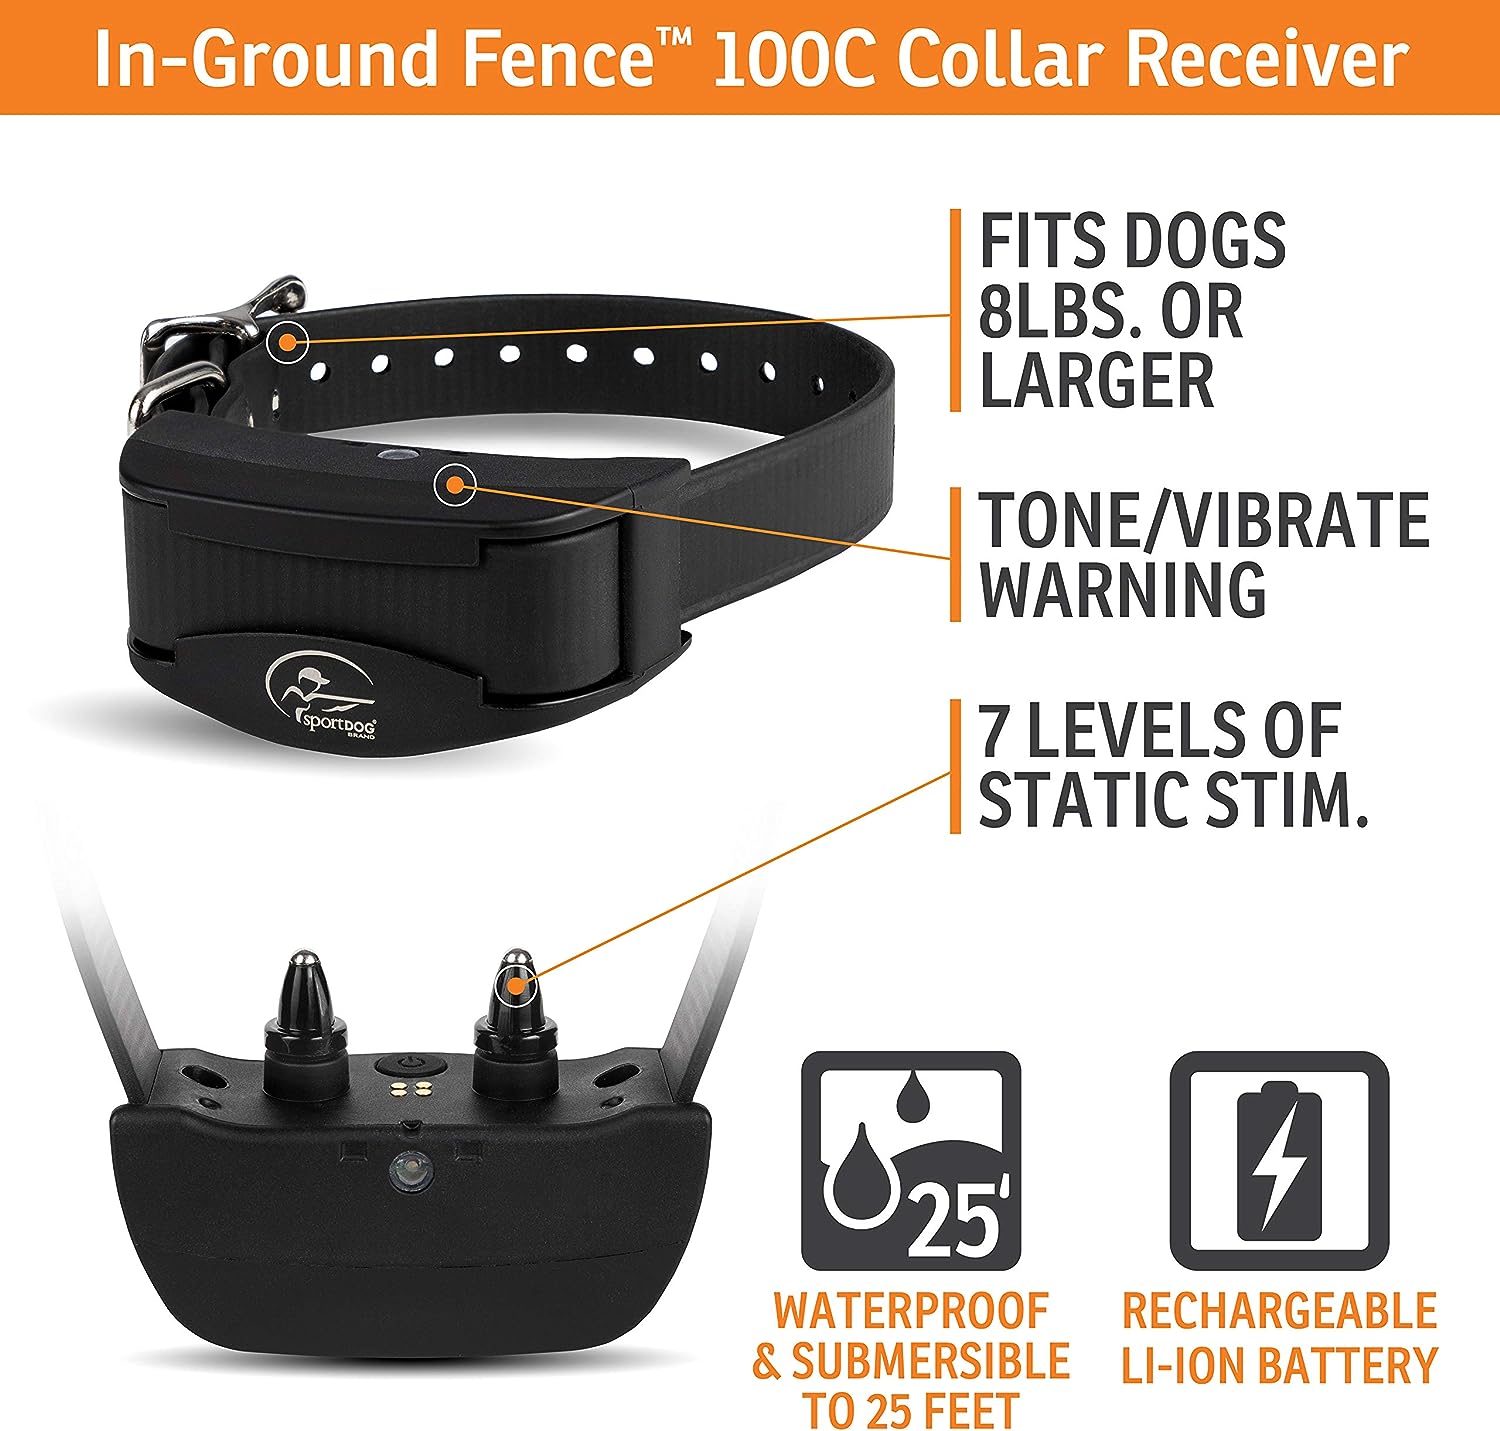 SportDOG Brand Rechargeable In-Ground Fence Systems – from the Parent Company of INVISIBLE FENCE Brand - Underground Wire Electric Fence - Tone, Vibration,  Static - 100 Acre Capability,Black